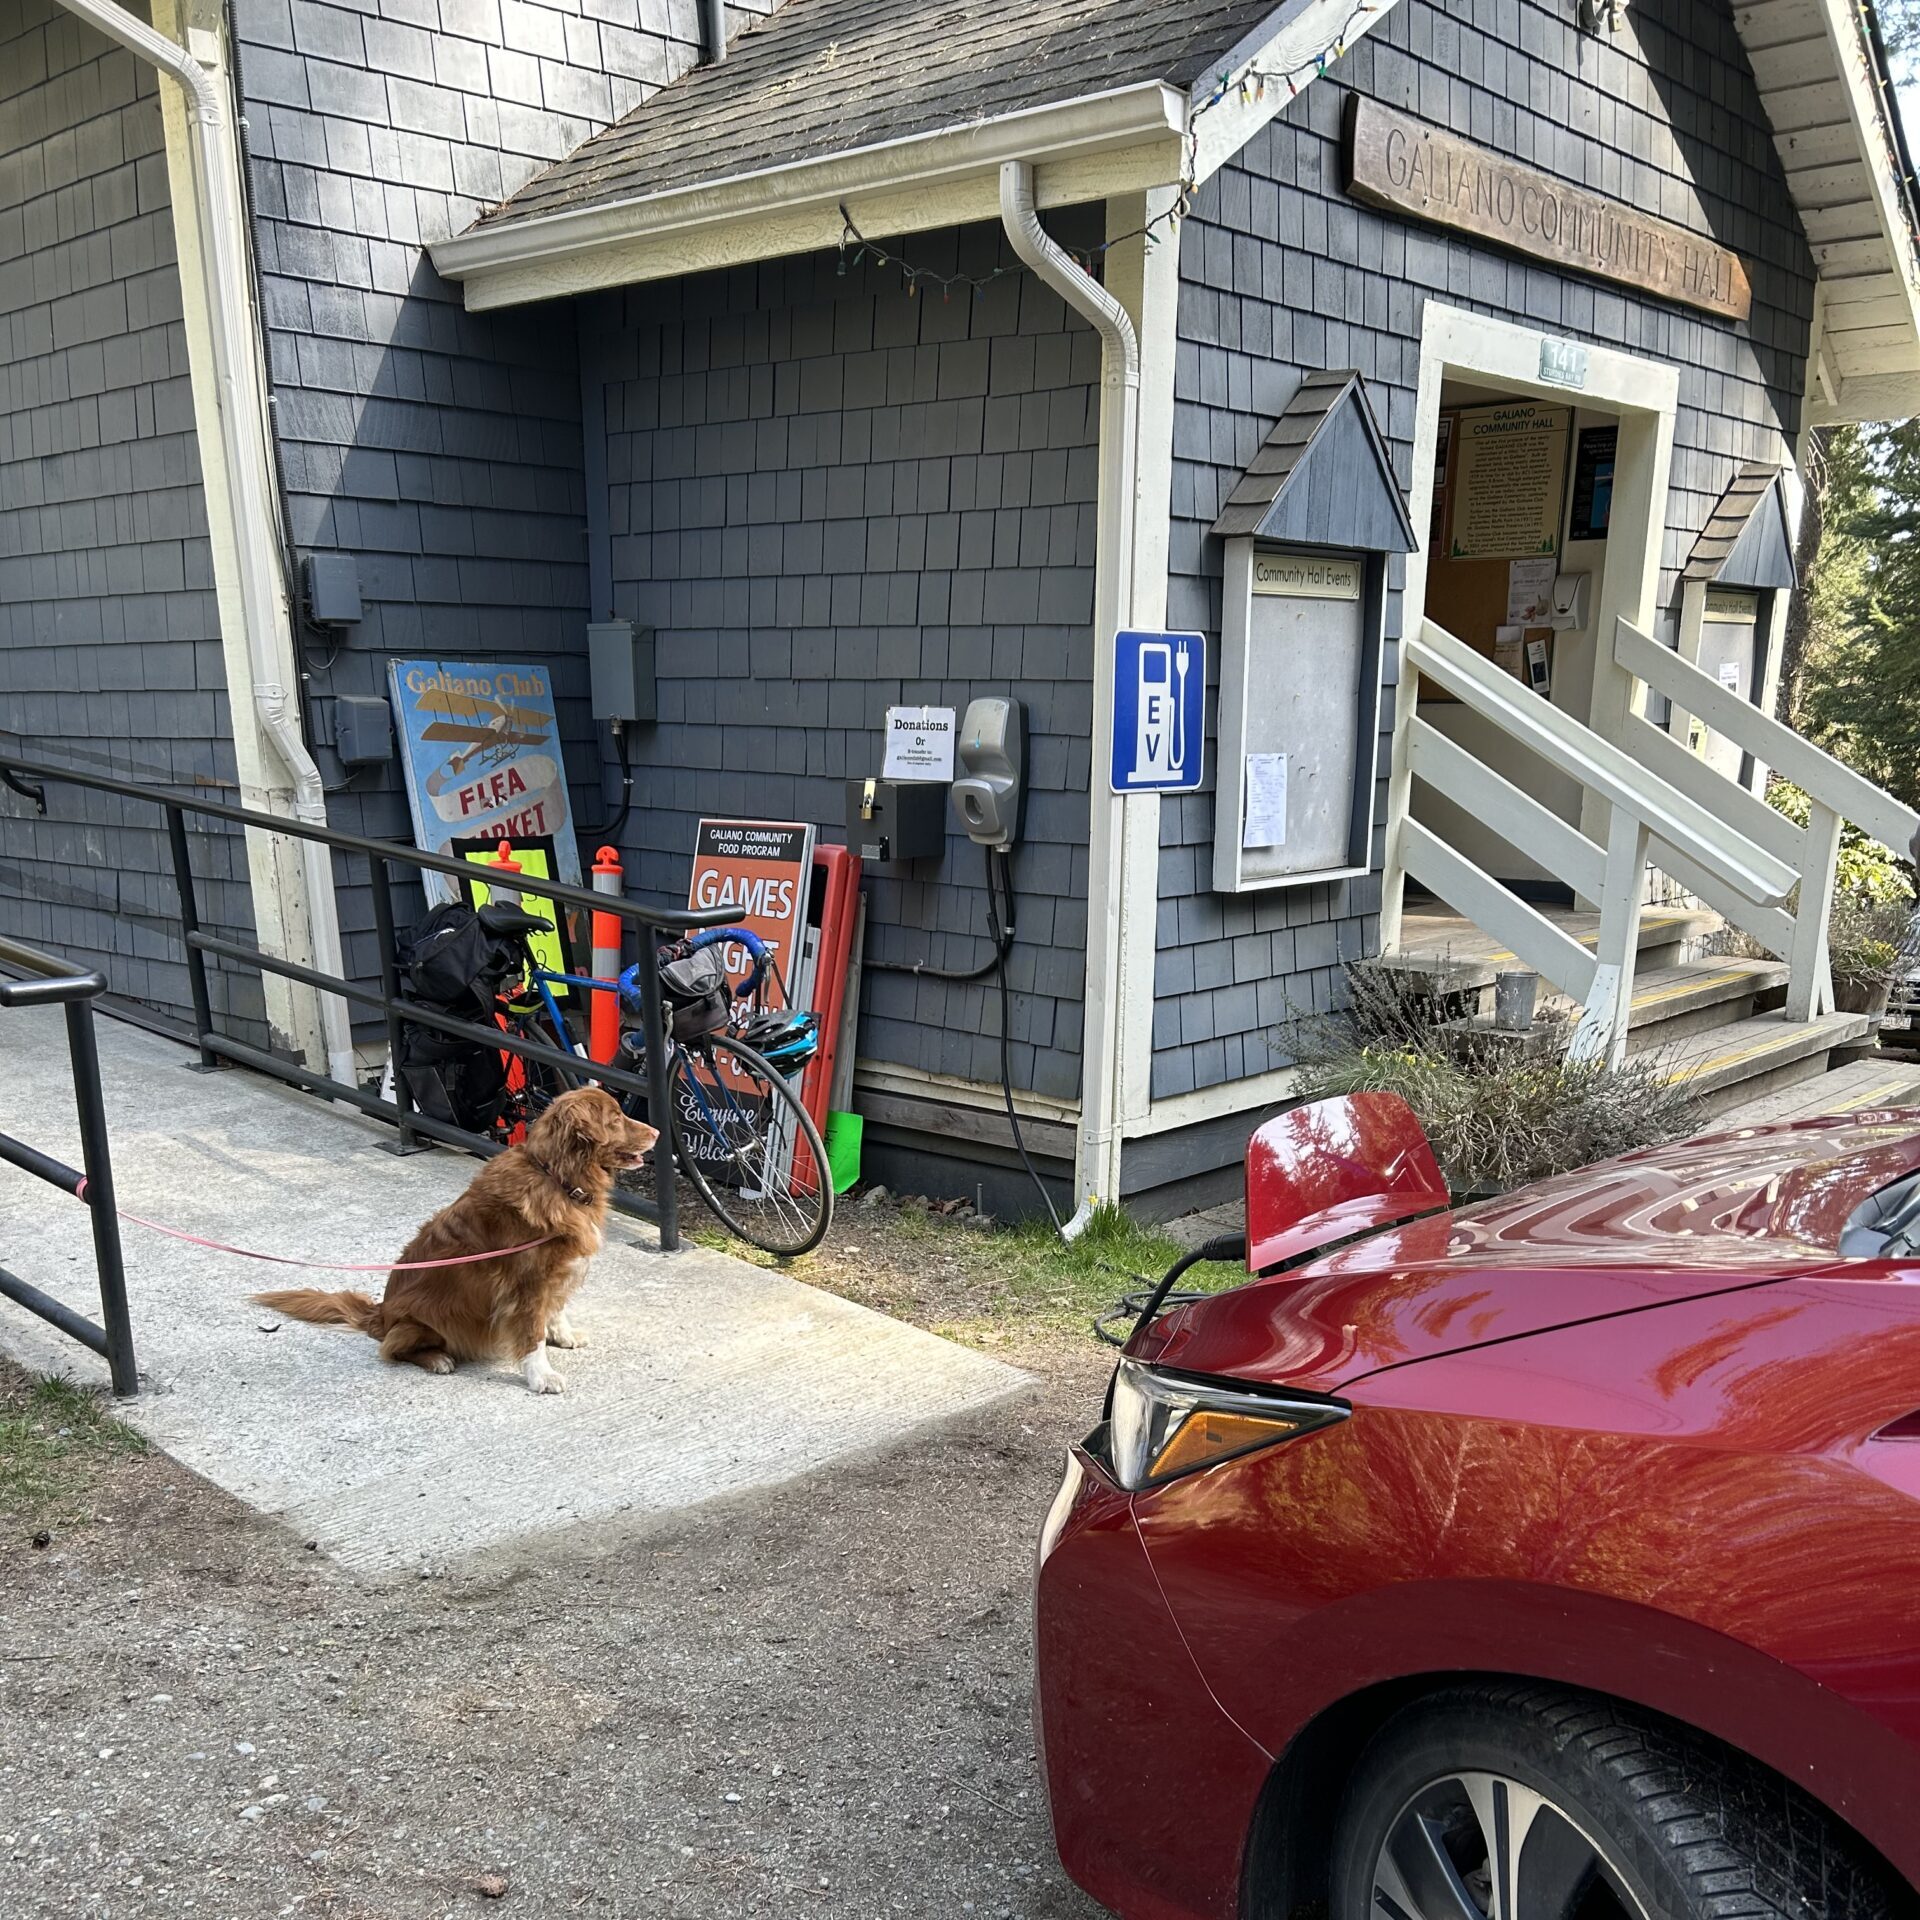 Red EV charging at a community hall with golden retriever dog looking on